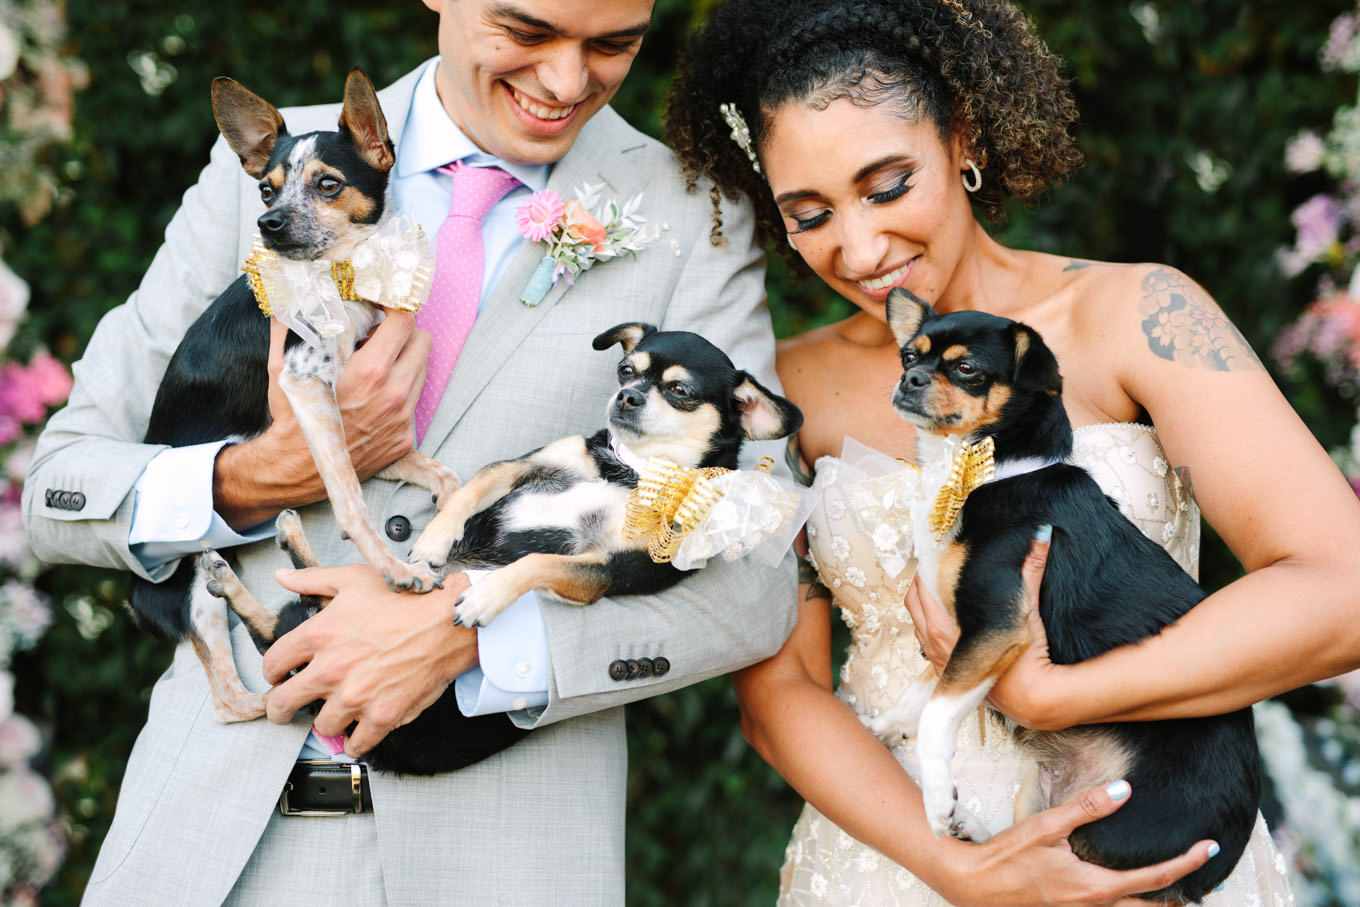 Bride and groom with three dogs Los Angeles Chinatown engagement session | Engagement, elopement, and wedding photography roundup of Mary Costa’s favorite images from 2020 | Colorful and elevated photography for fun-loving couples in Southern California | #2020wedding #elopement #weddingphoto #weddingphotography #microwedding   Source: Mary Costa Photography | Los Angeles